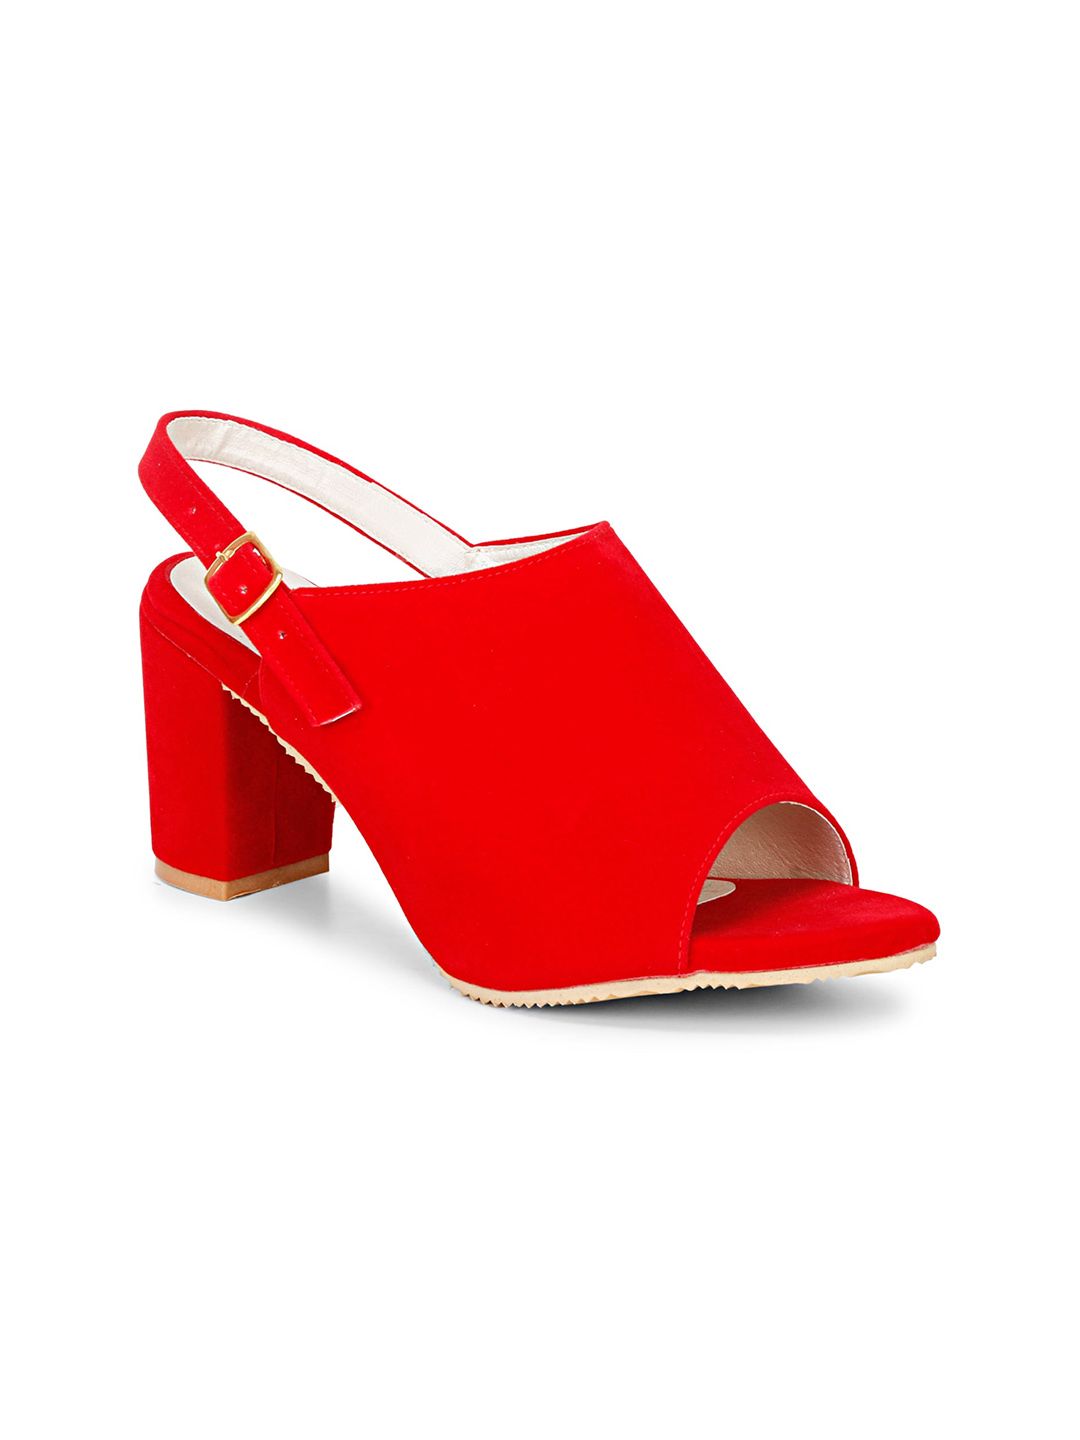 Misto Red Suede Block Peep Toes with Buckles Price in India